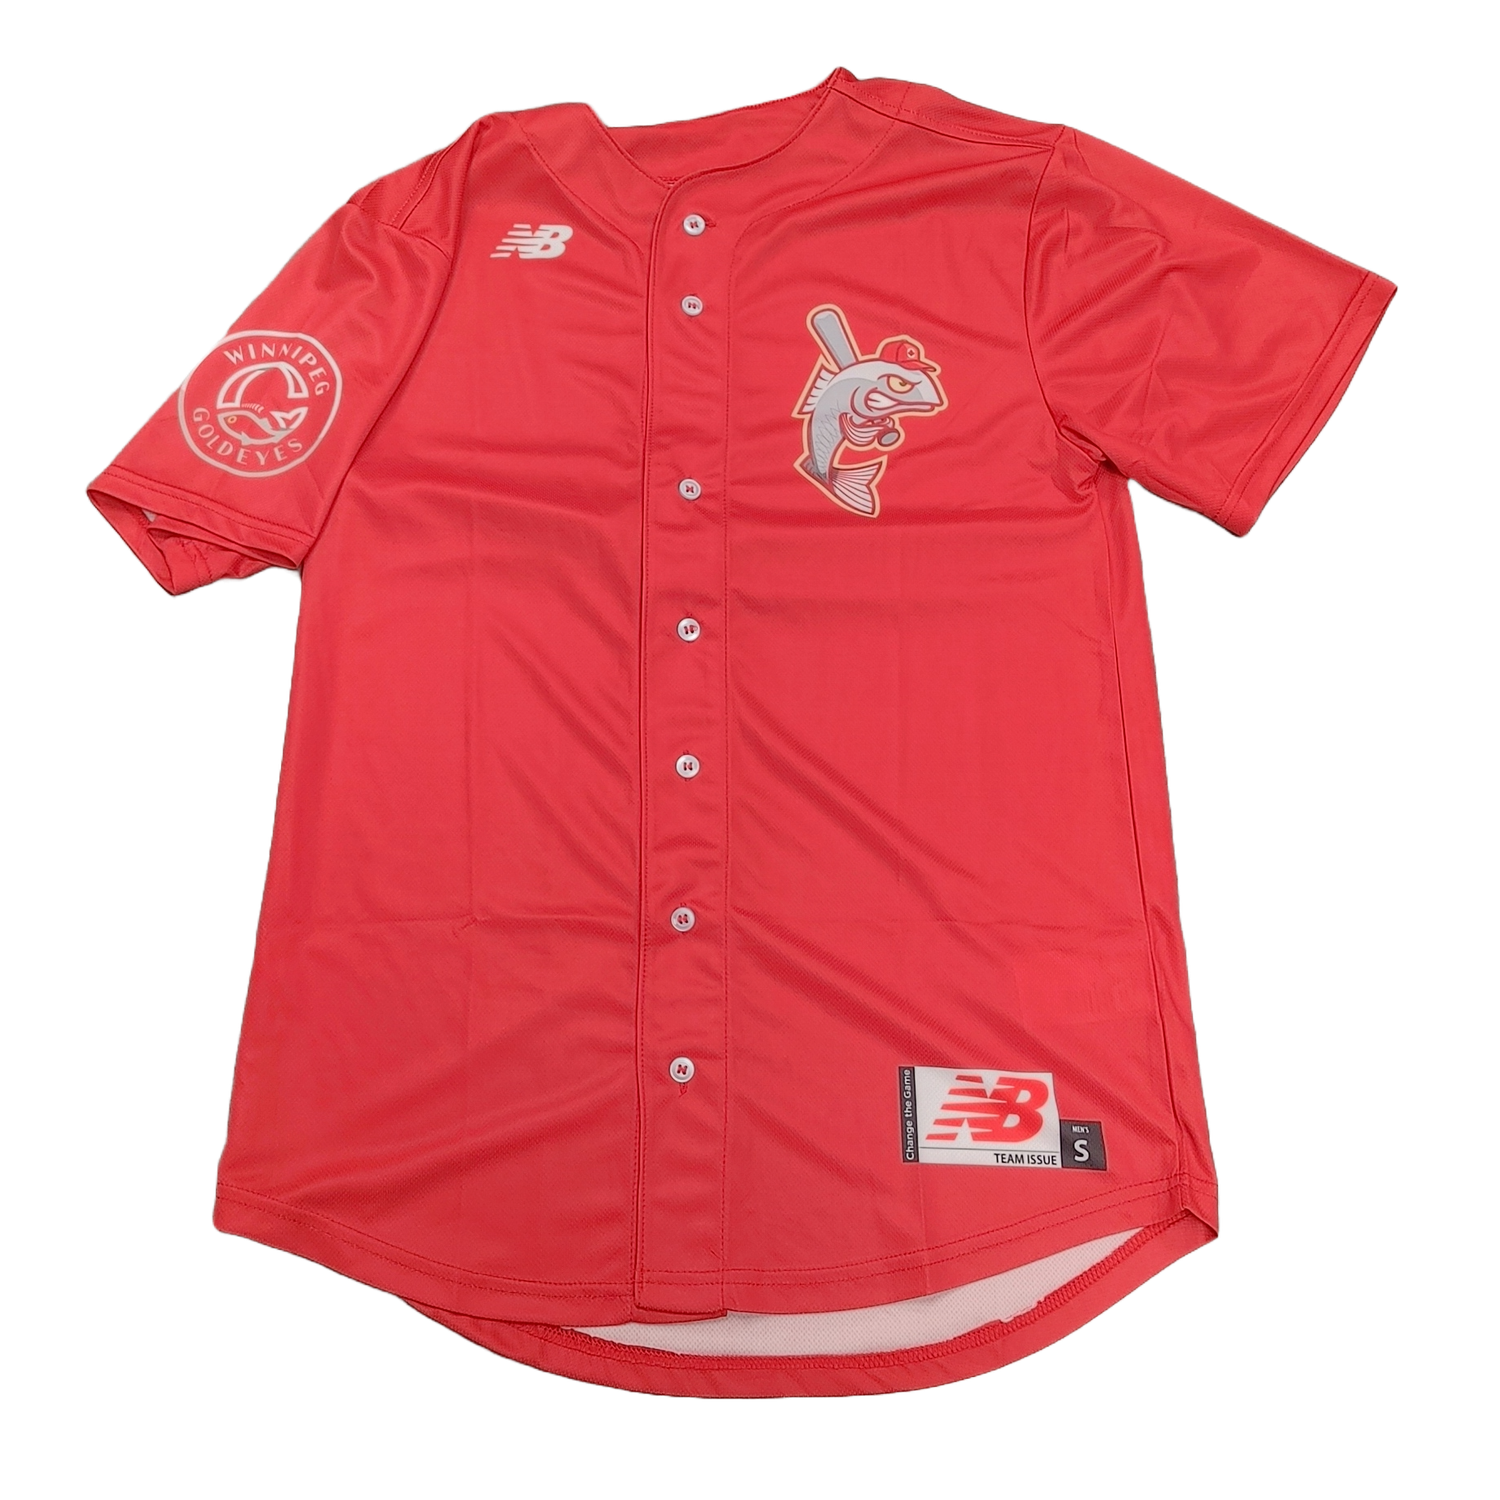 NEW BALANCE RED JERSEY, Size: S